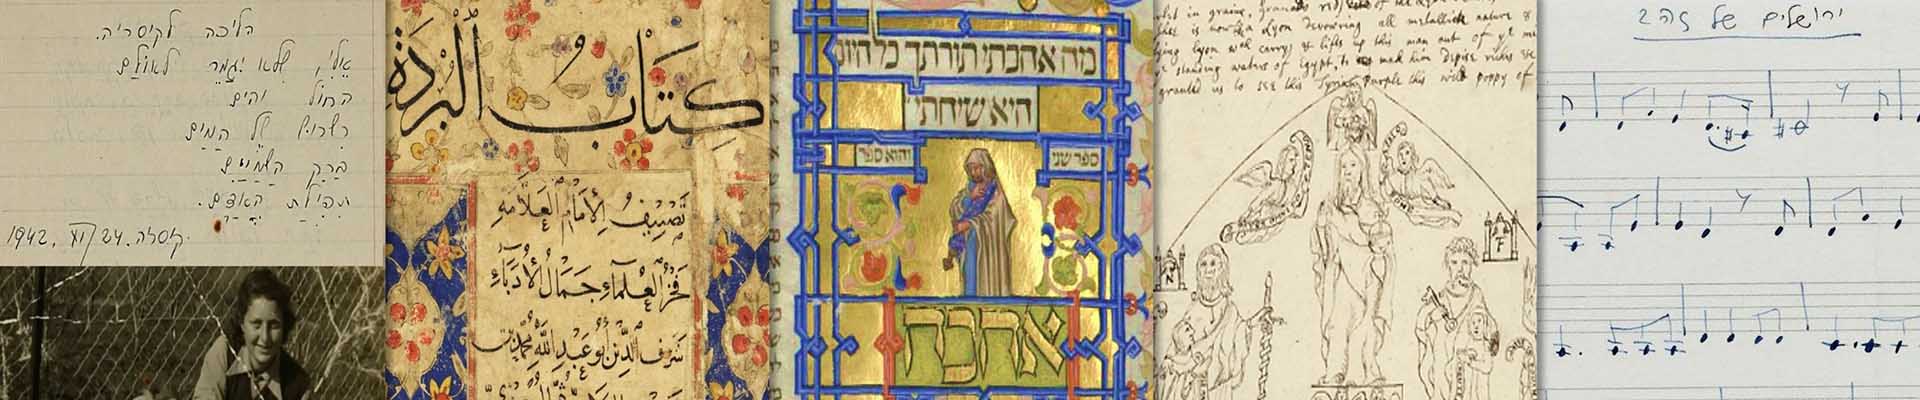 The Resnick Family Fellowship at the National Library of Israel 